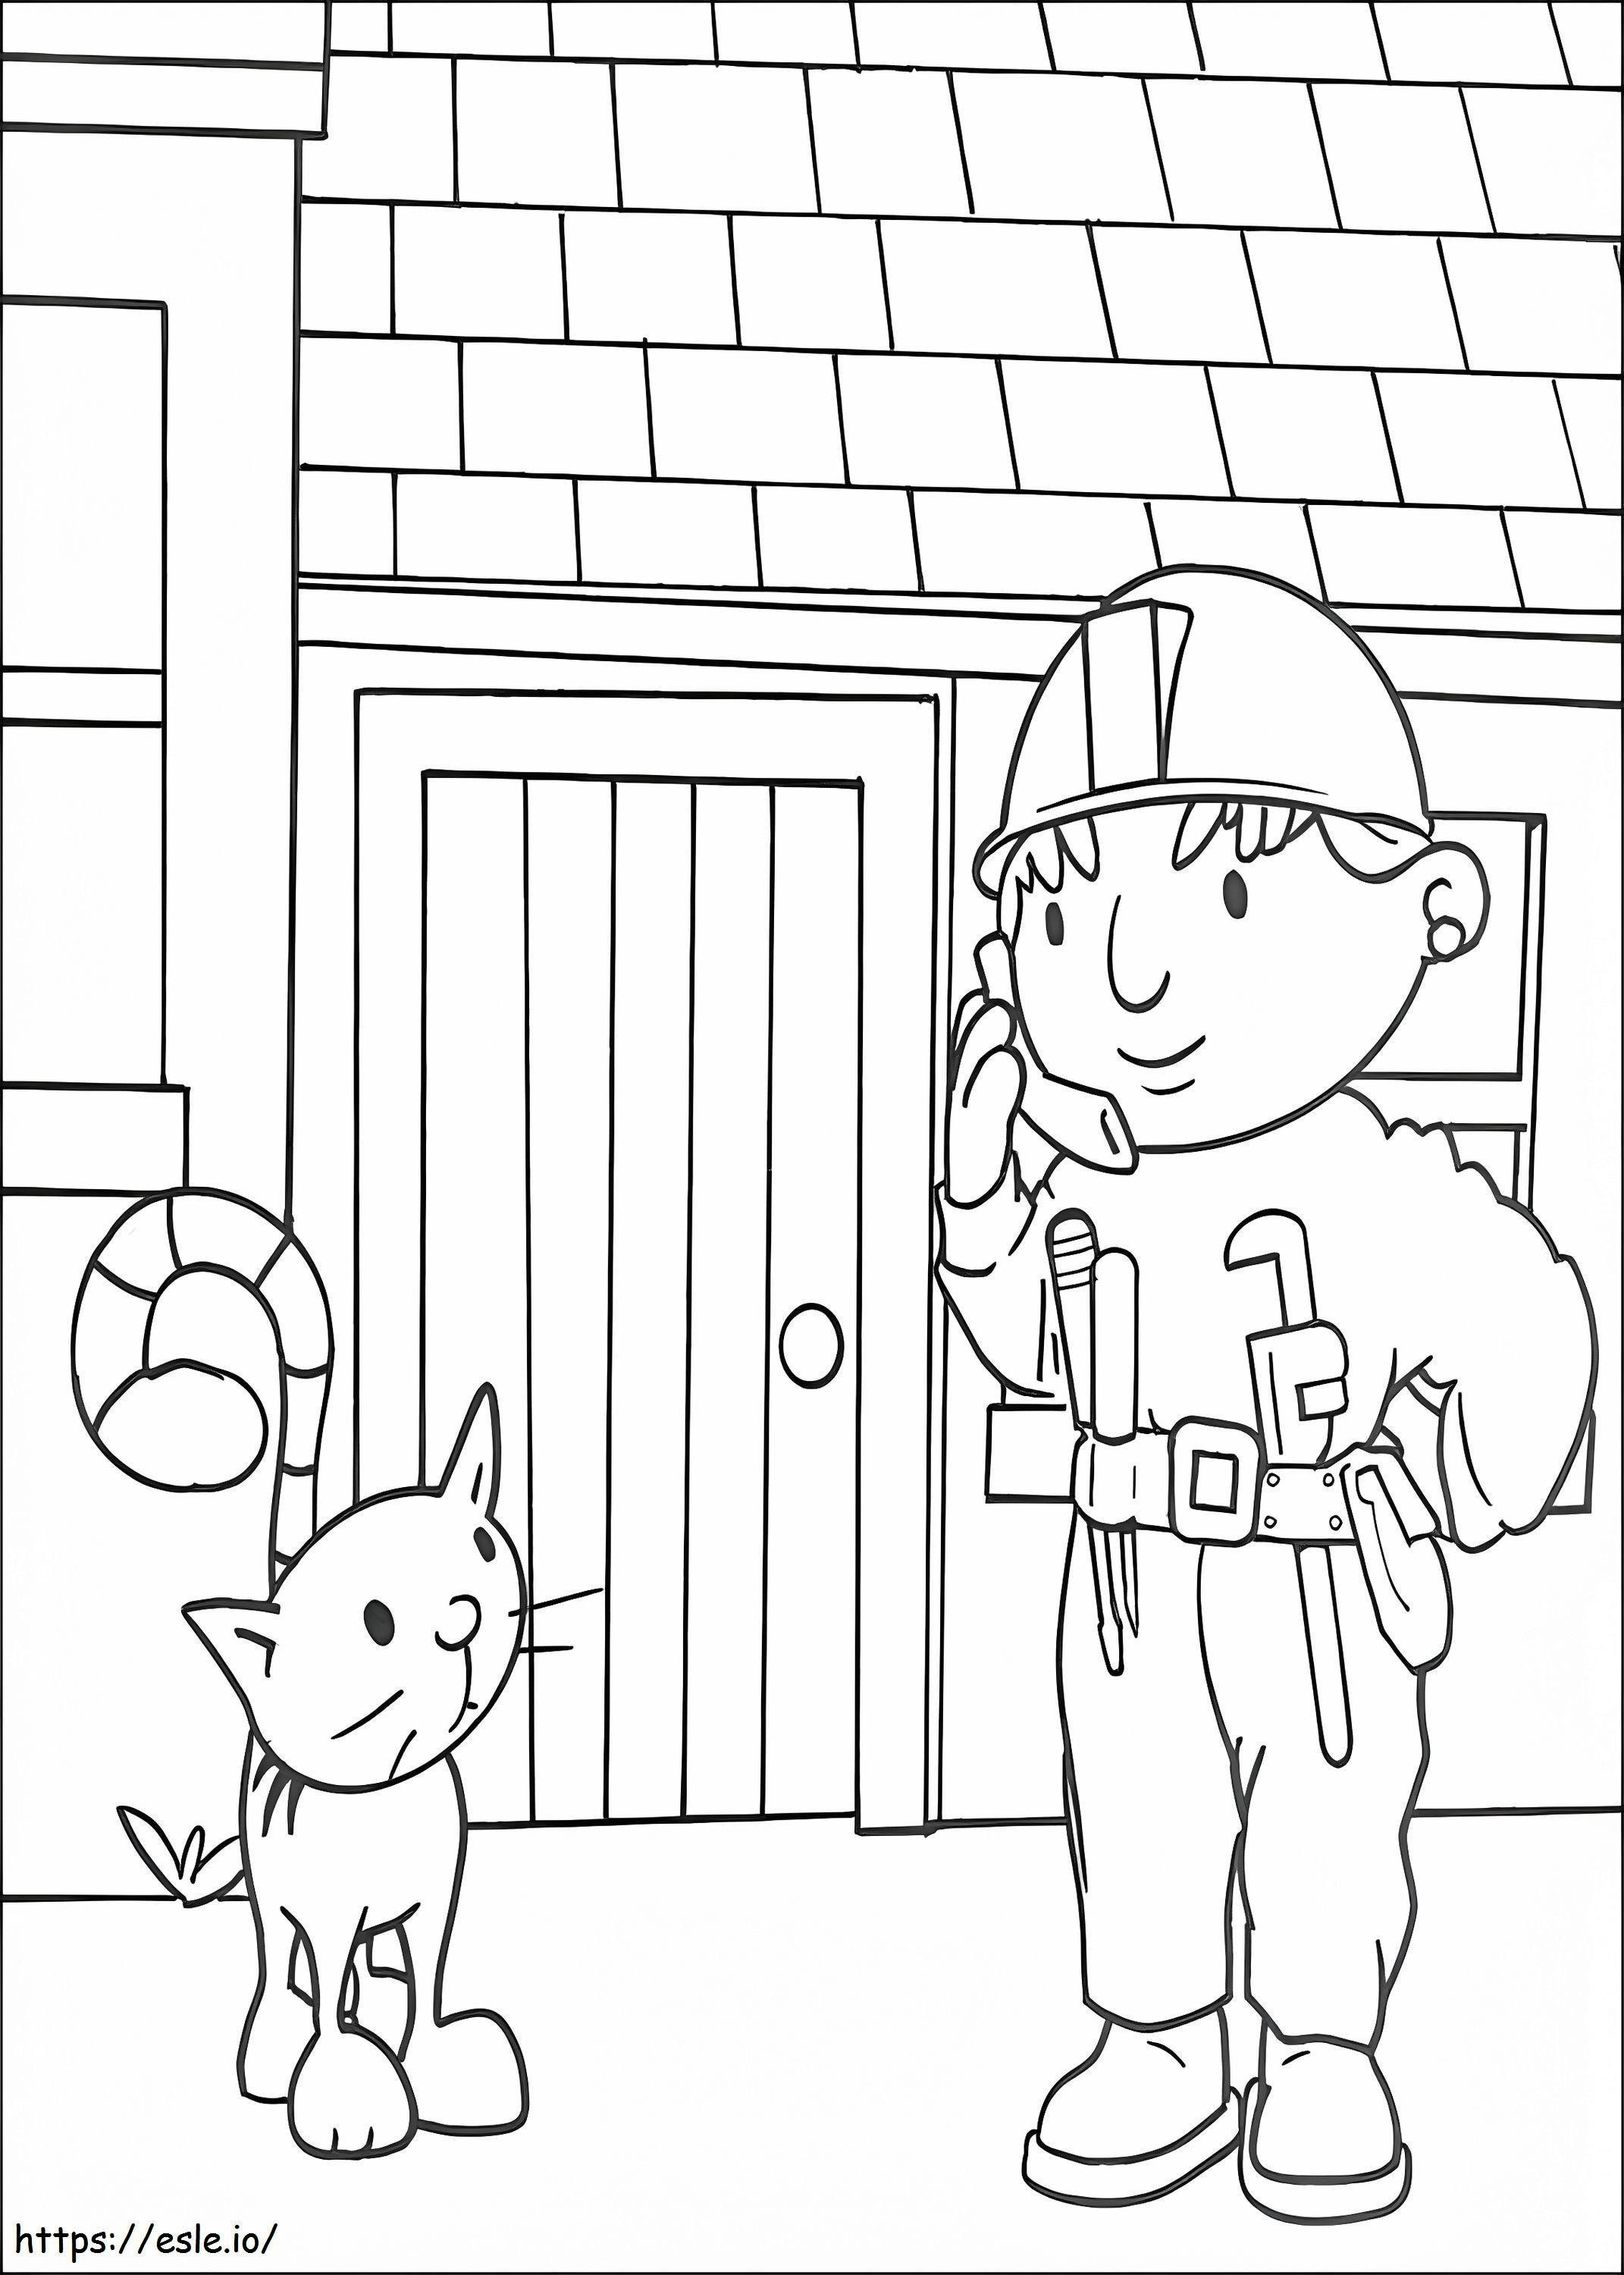 1534128344 Wendy Calling A4 coloring page